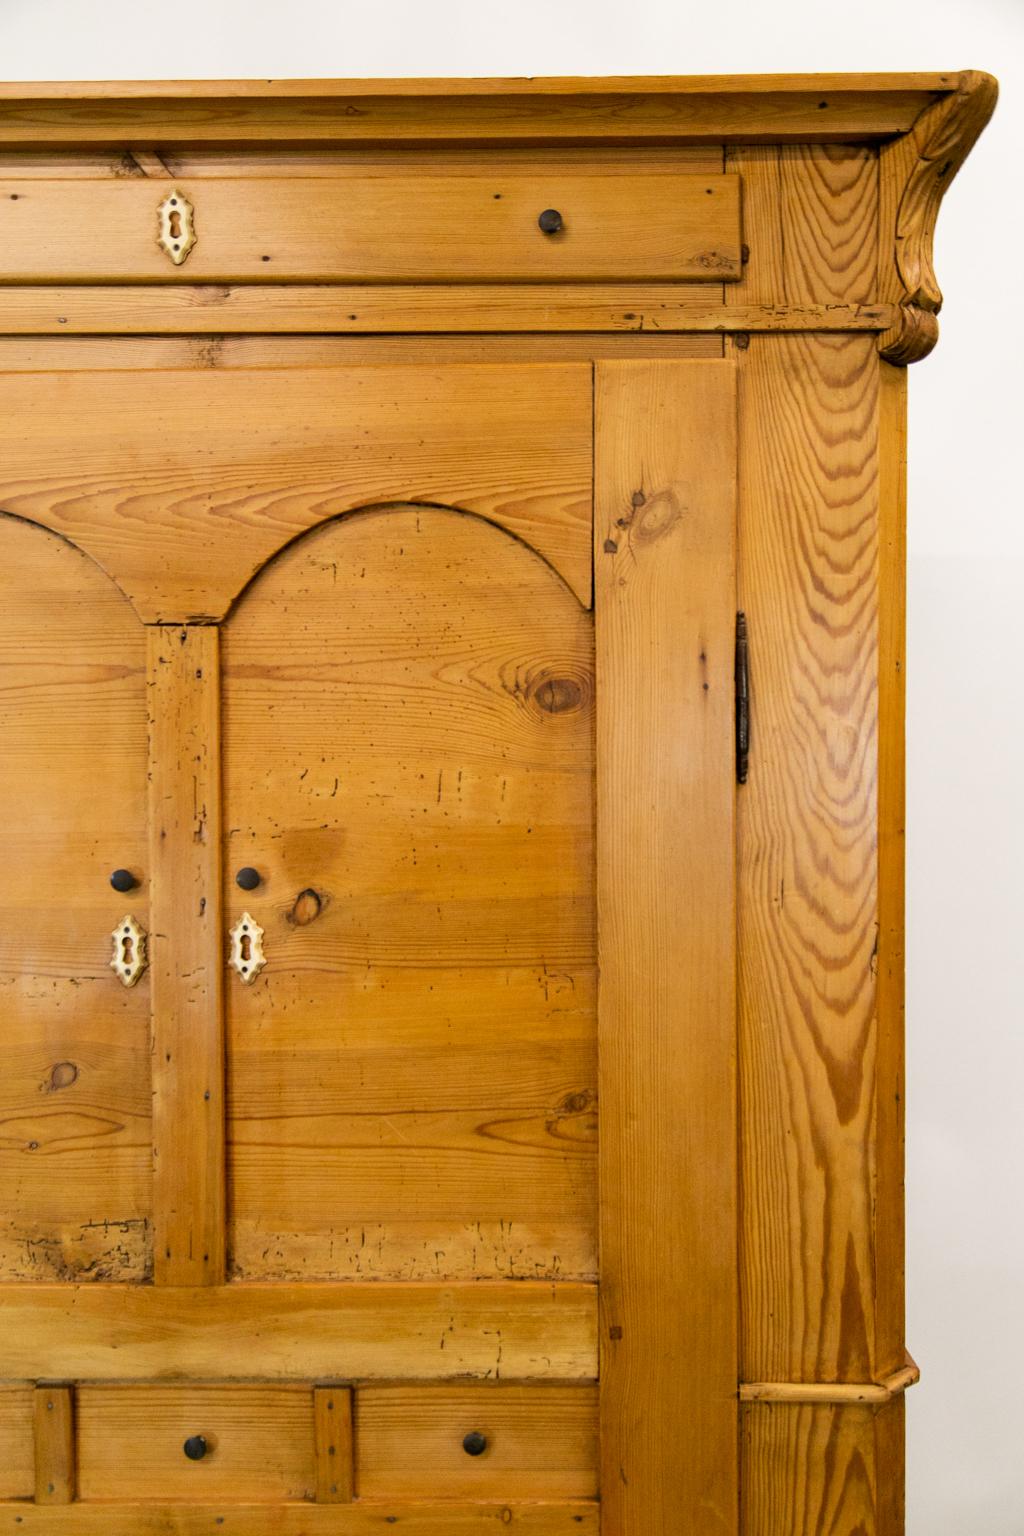 This unusual pine armoire has an entirely dummy front including the door, upper frieze drawer, and lower base drawer. The interior has sixteen coat hooks and one adjustable shelf. There is one fixed shelf in the lower area. The door has raised